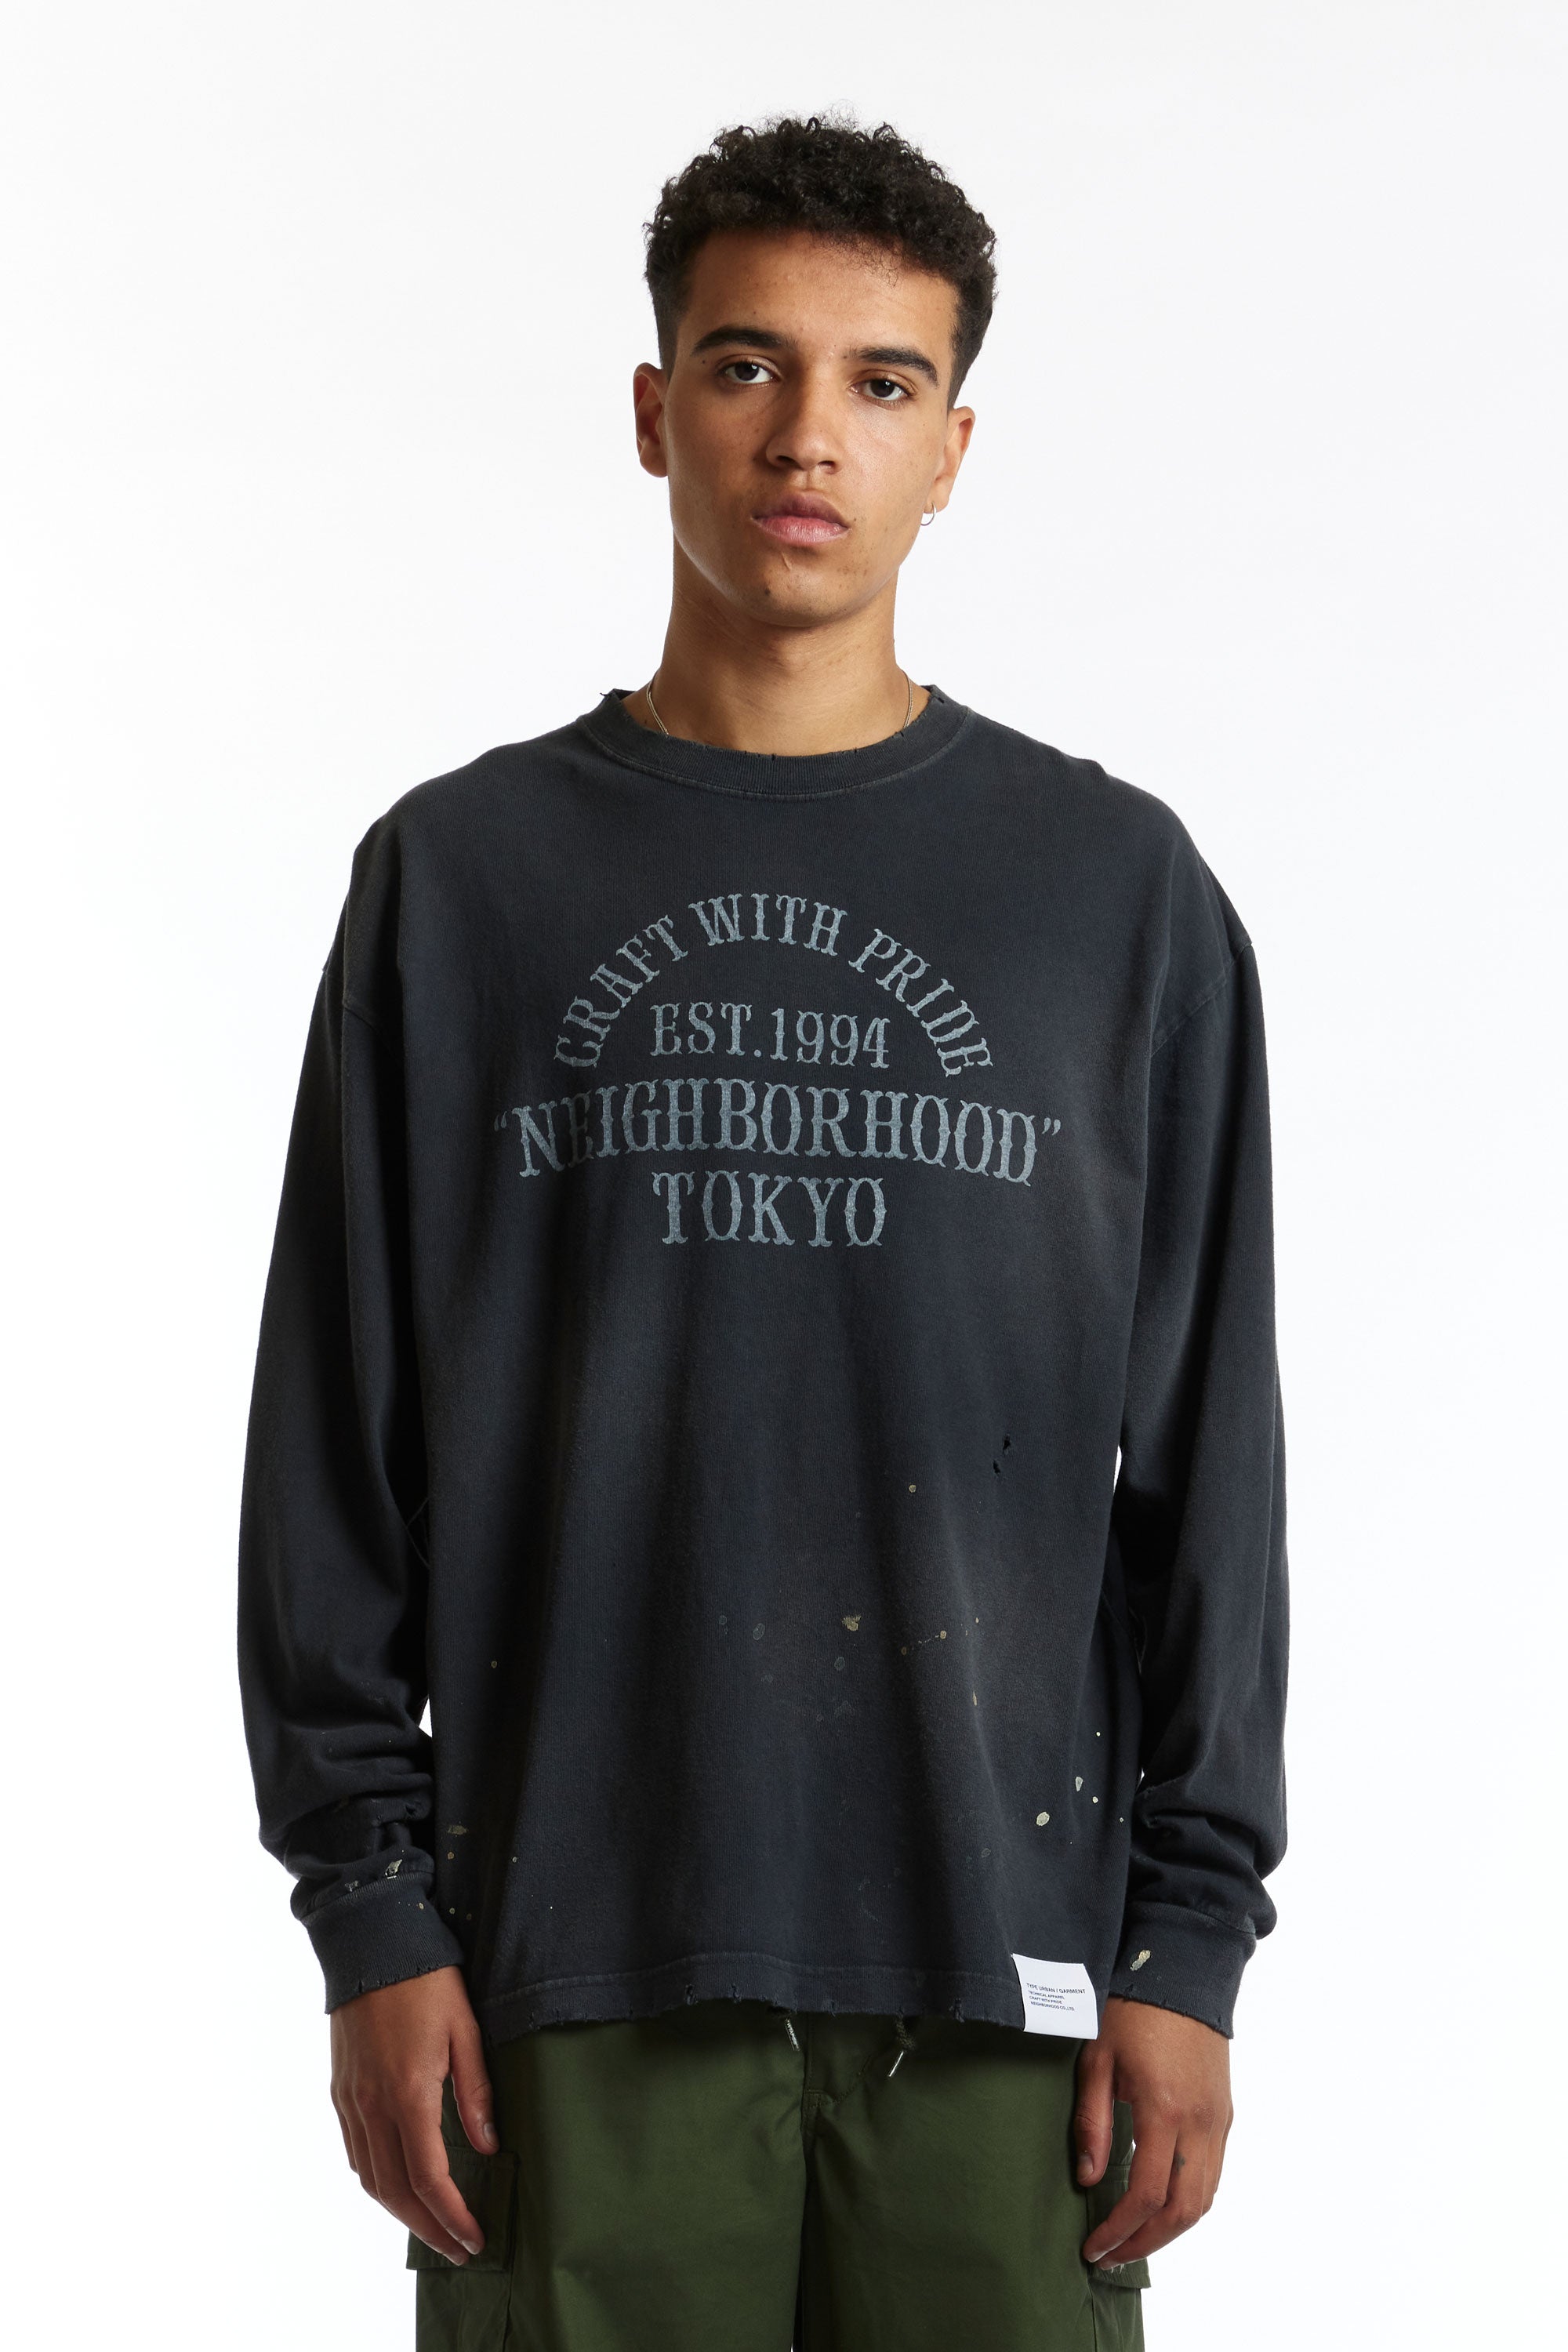 The NEIGHBORHOOD - DAMAGE LONGSLEEVE CREW BLACK available online with global shipping, and in PAM Stores Melbourne and Sydney.